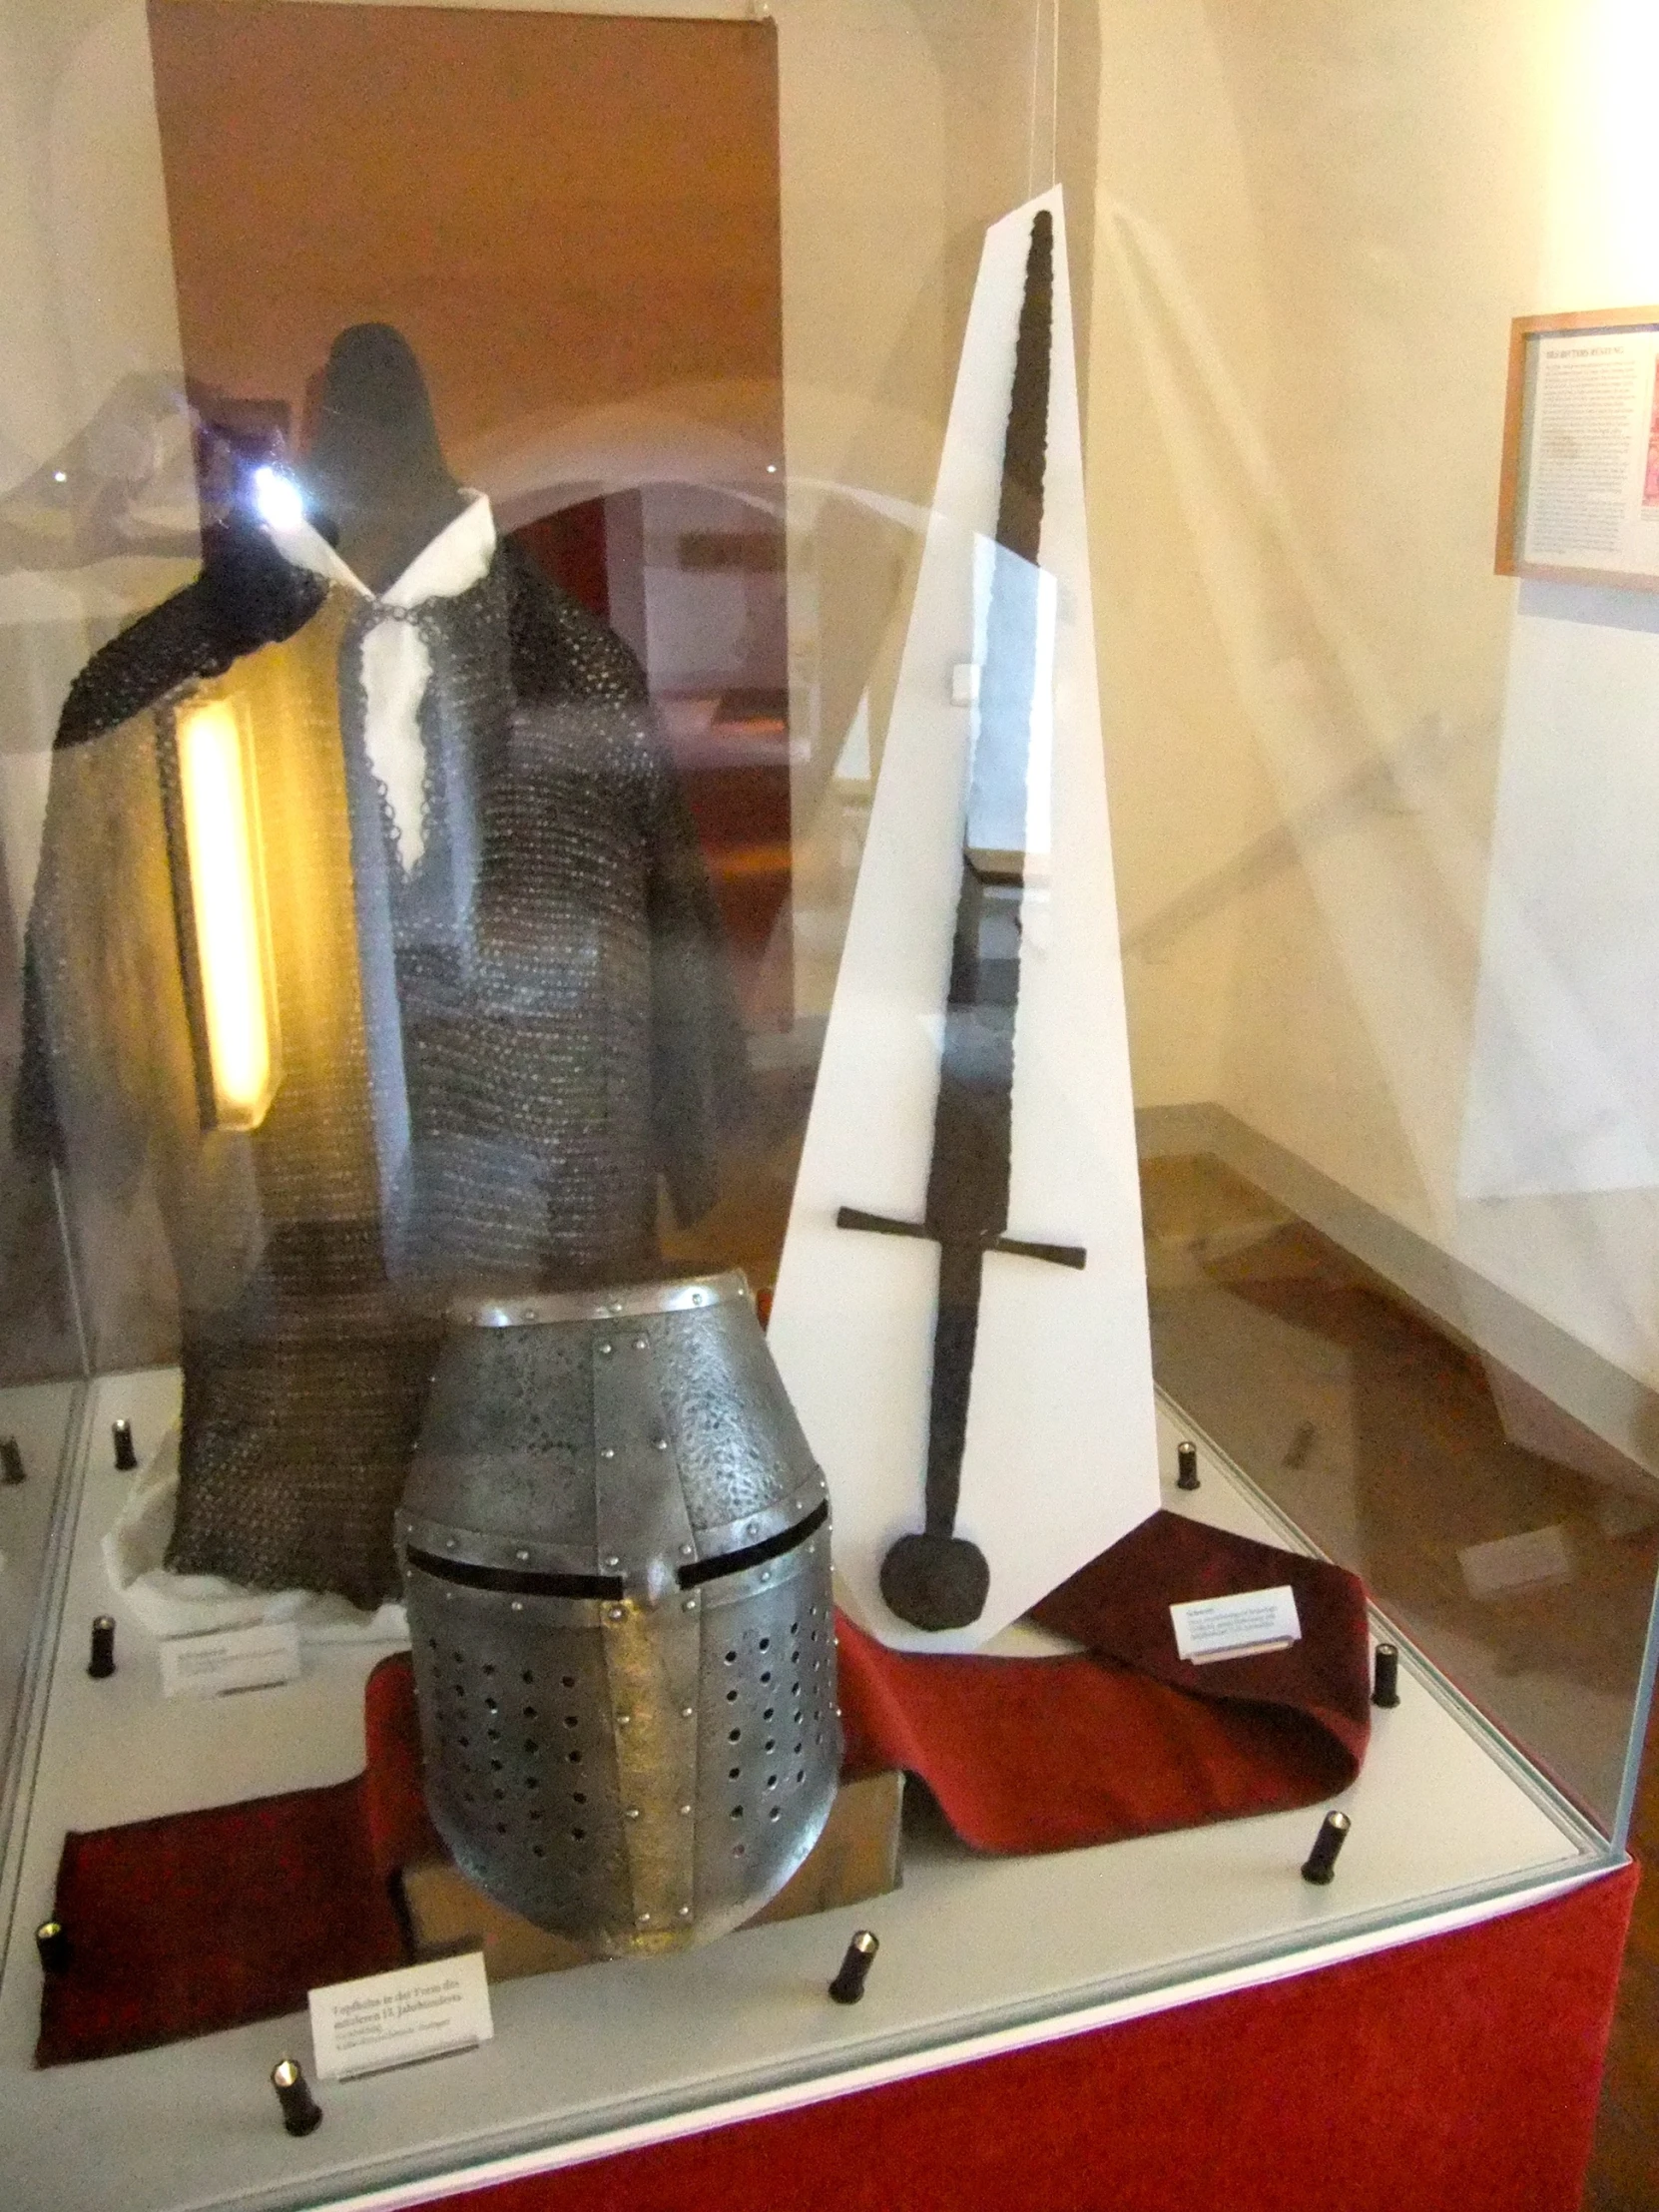 an exhibit case with medieval armor on display